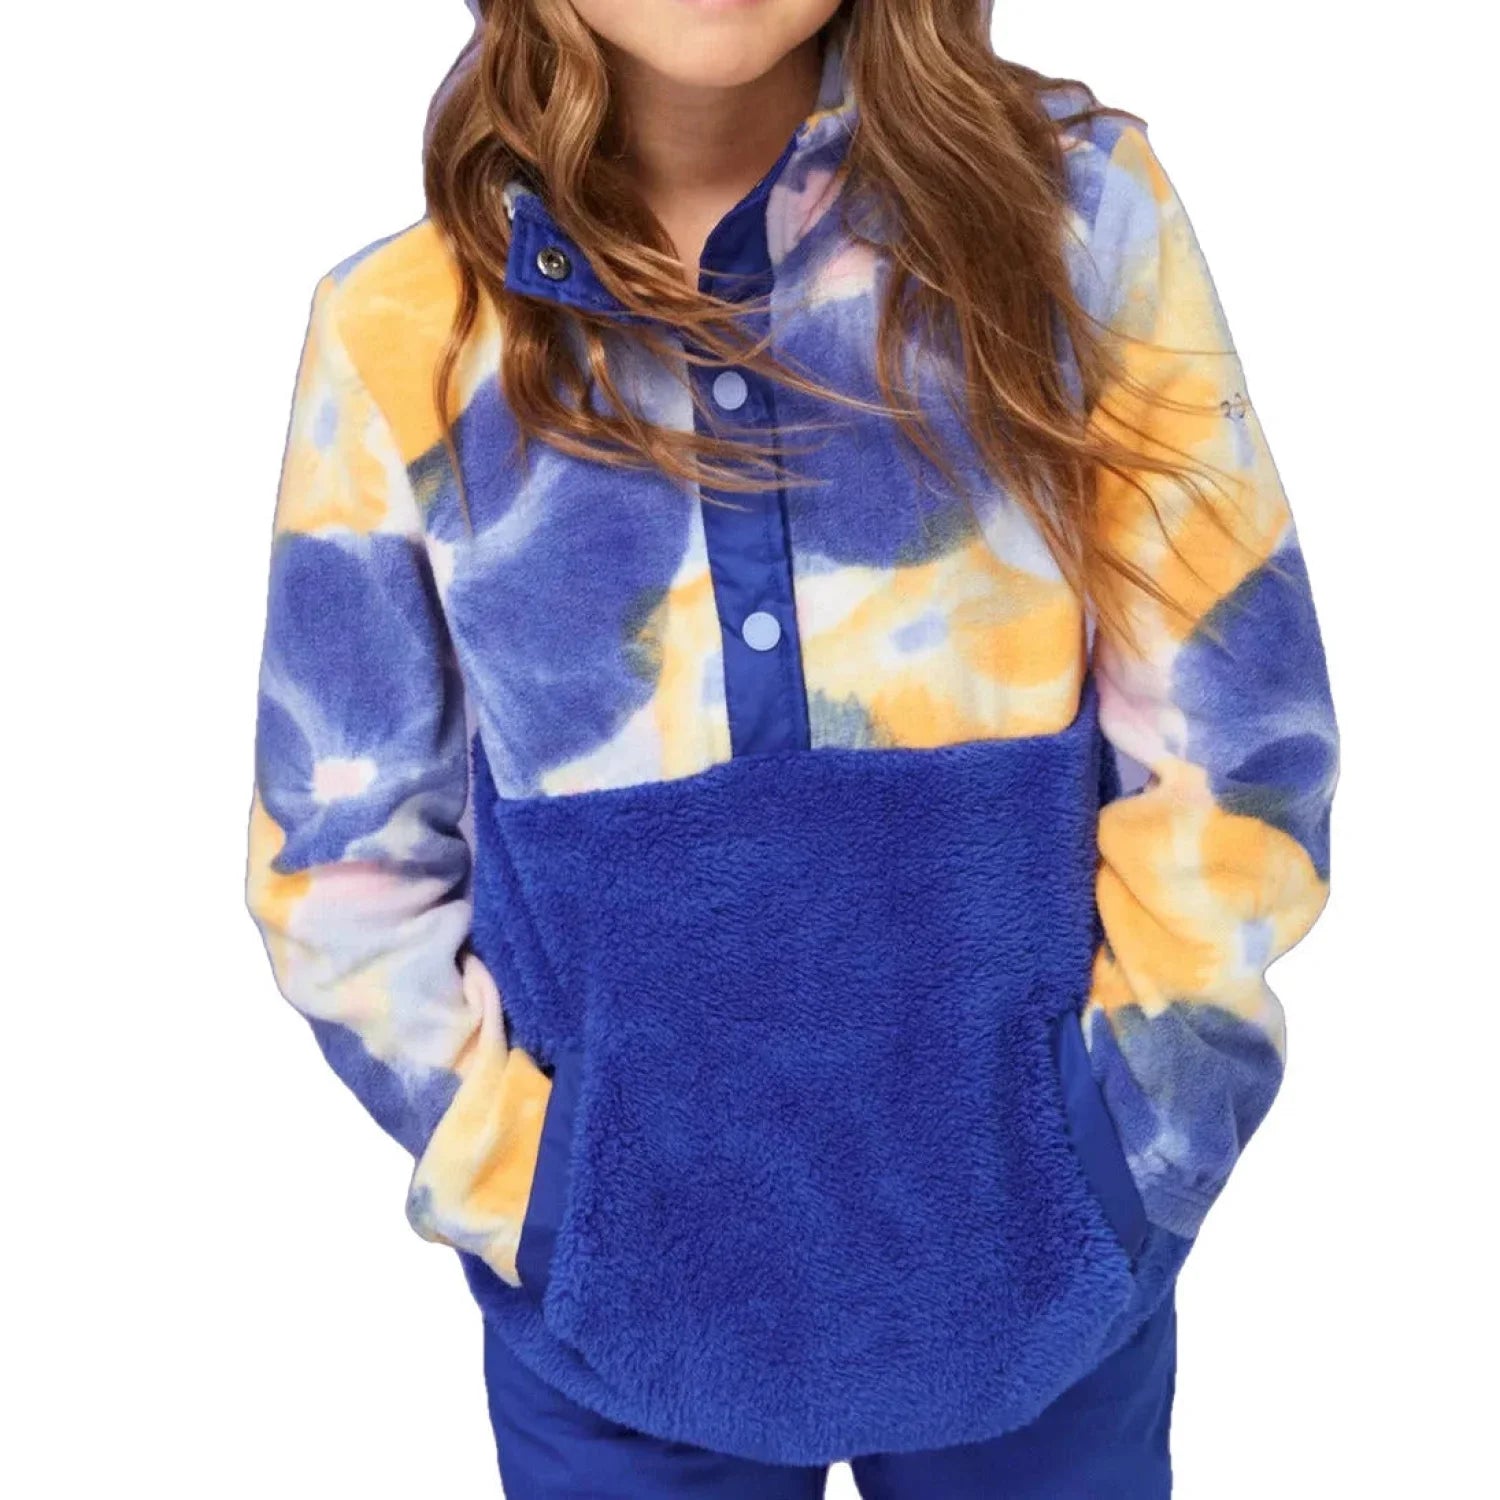 Roxy Girl's Alabama Technical Fleece shown in Bright White Pansy color option. Front view.